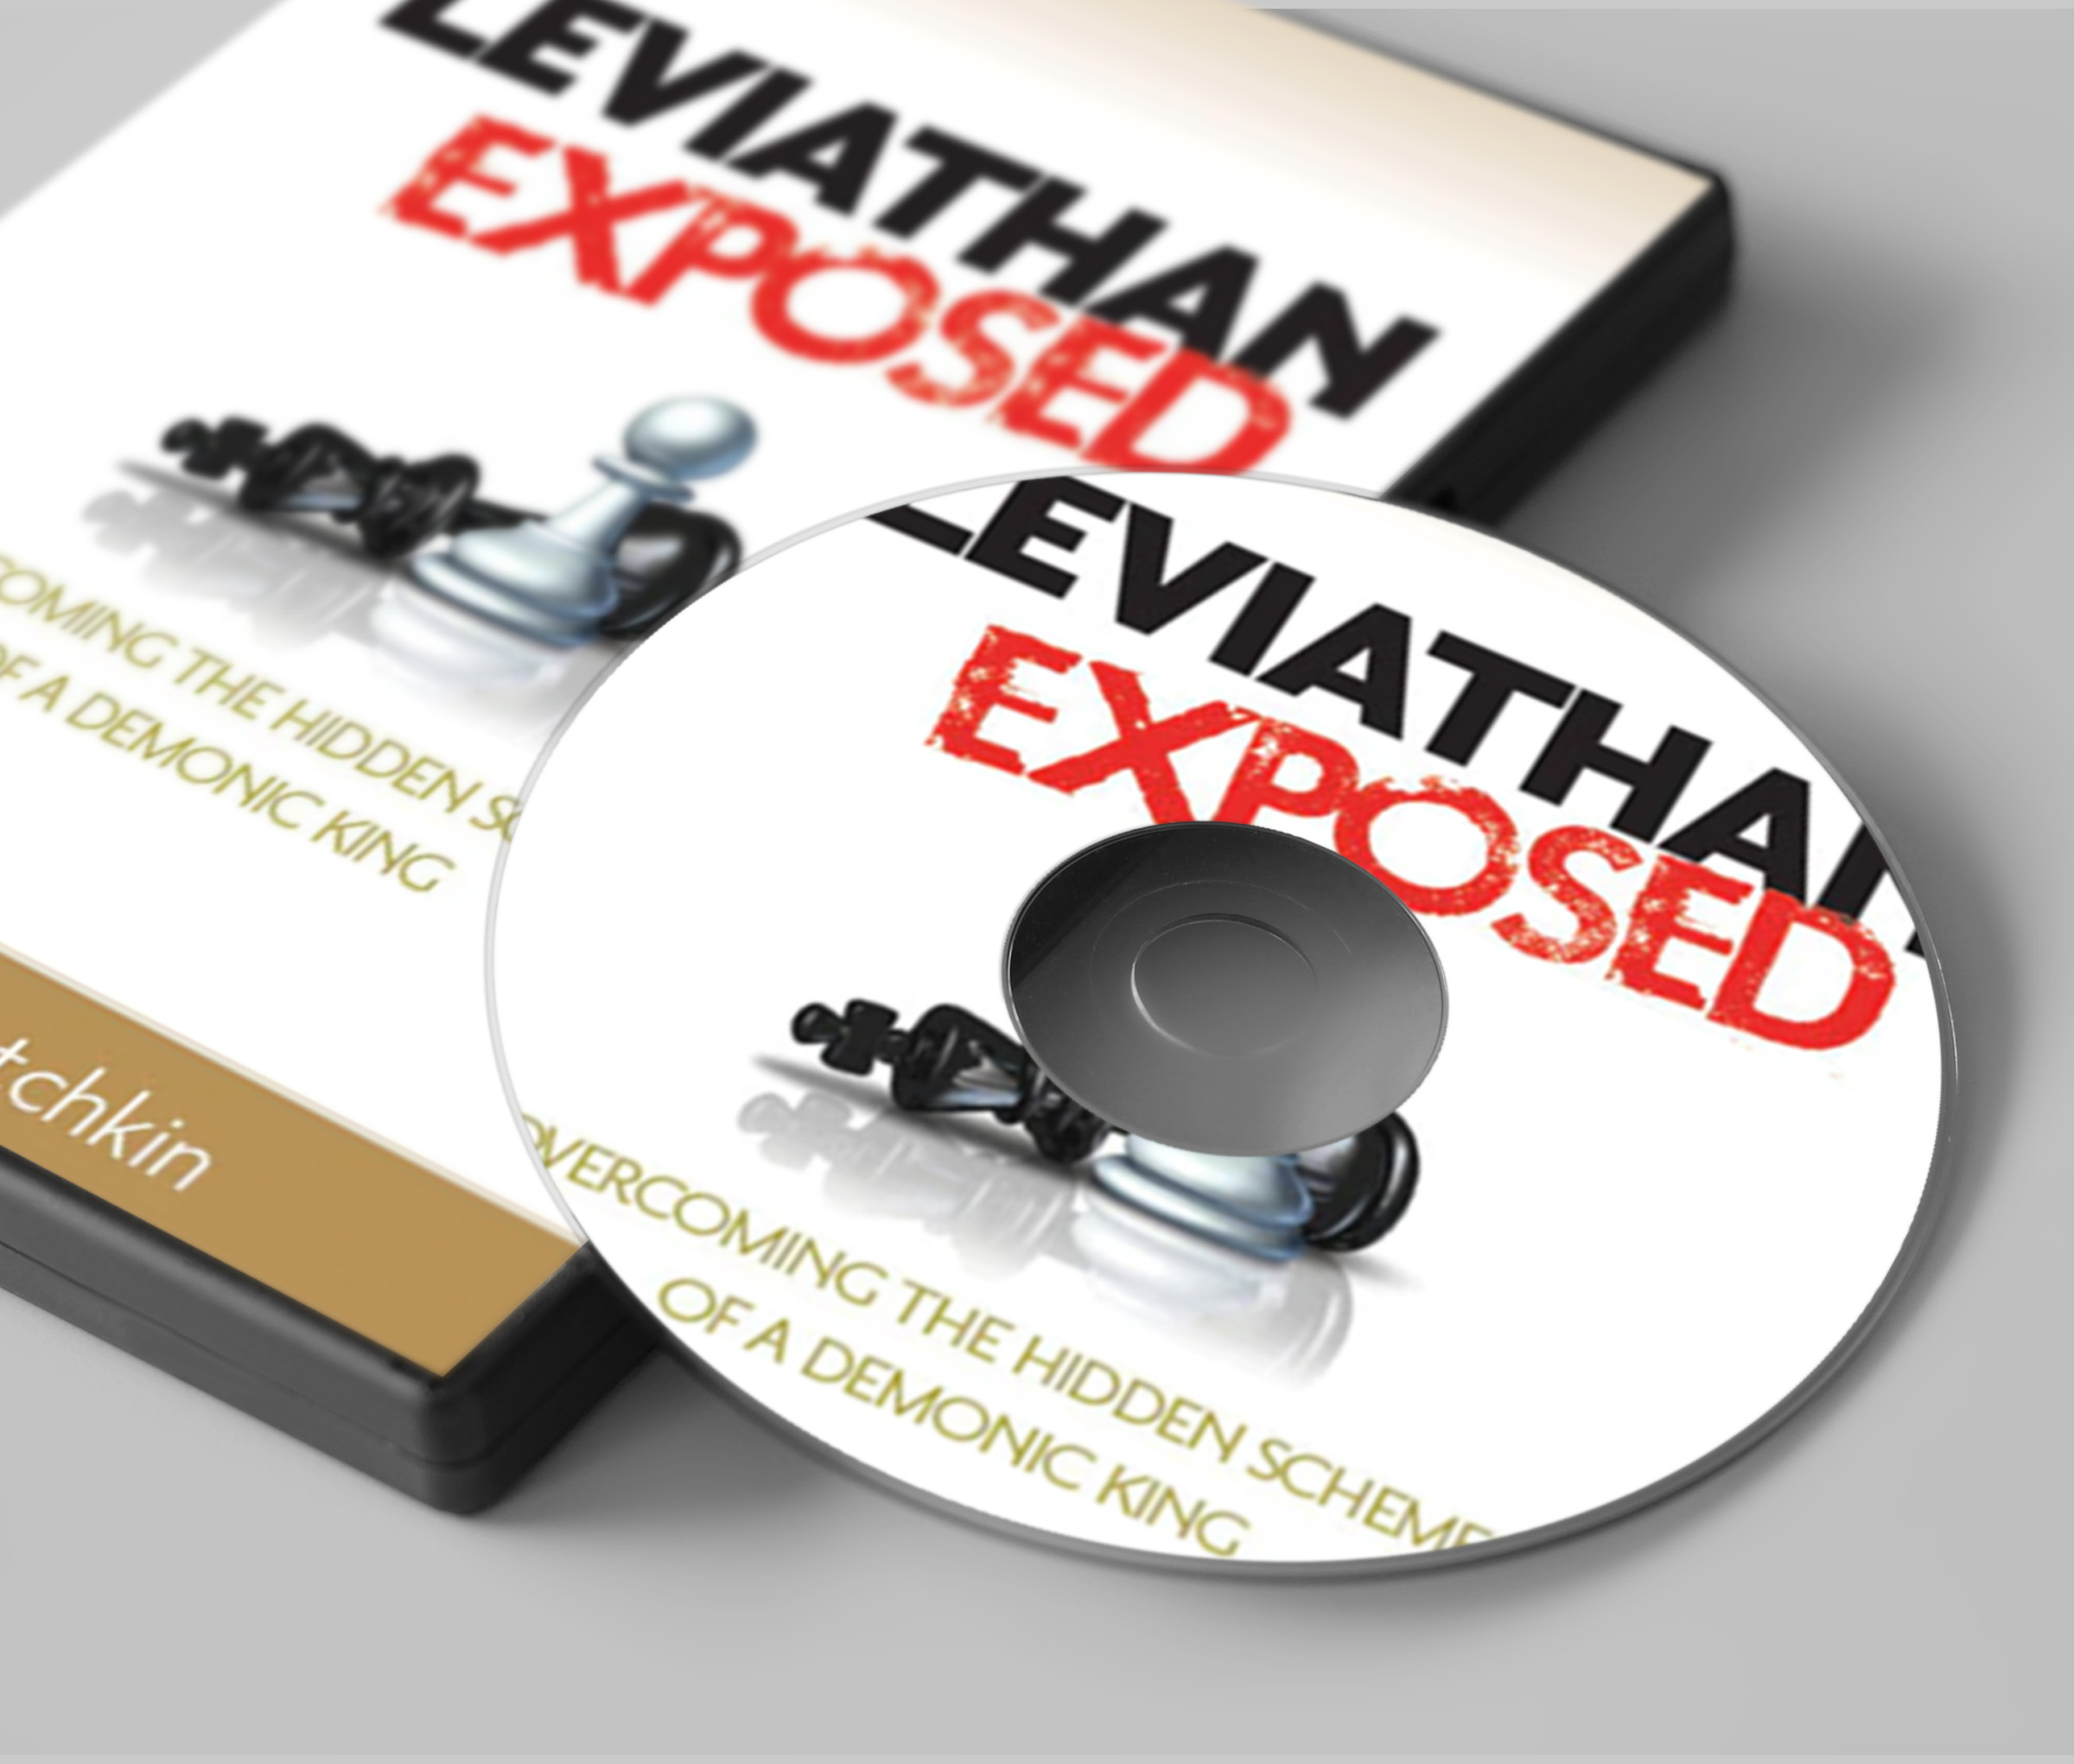 Leviathan-exposed